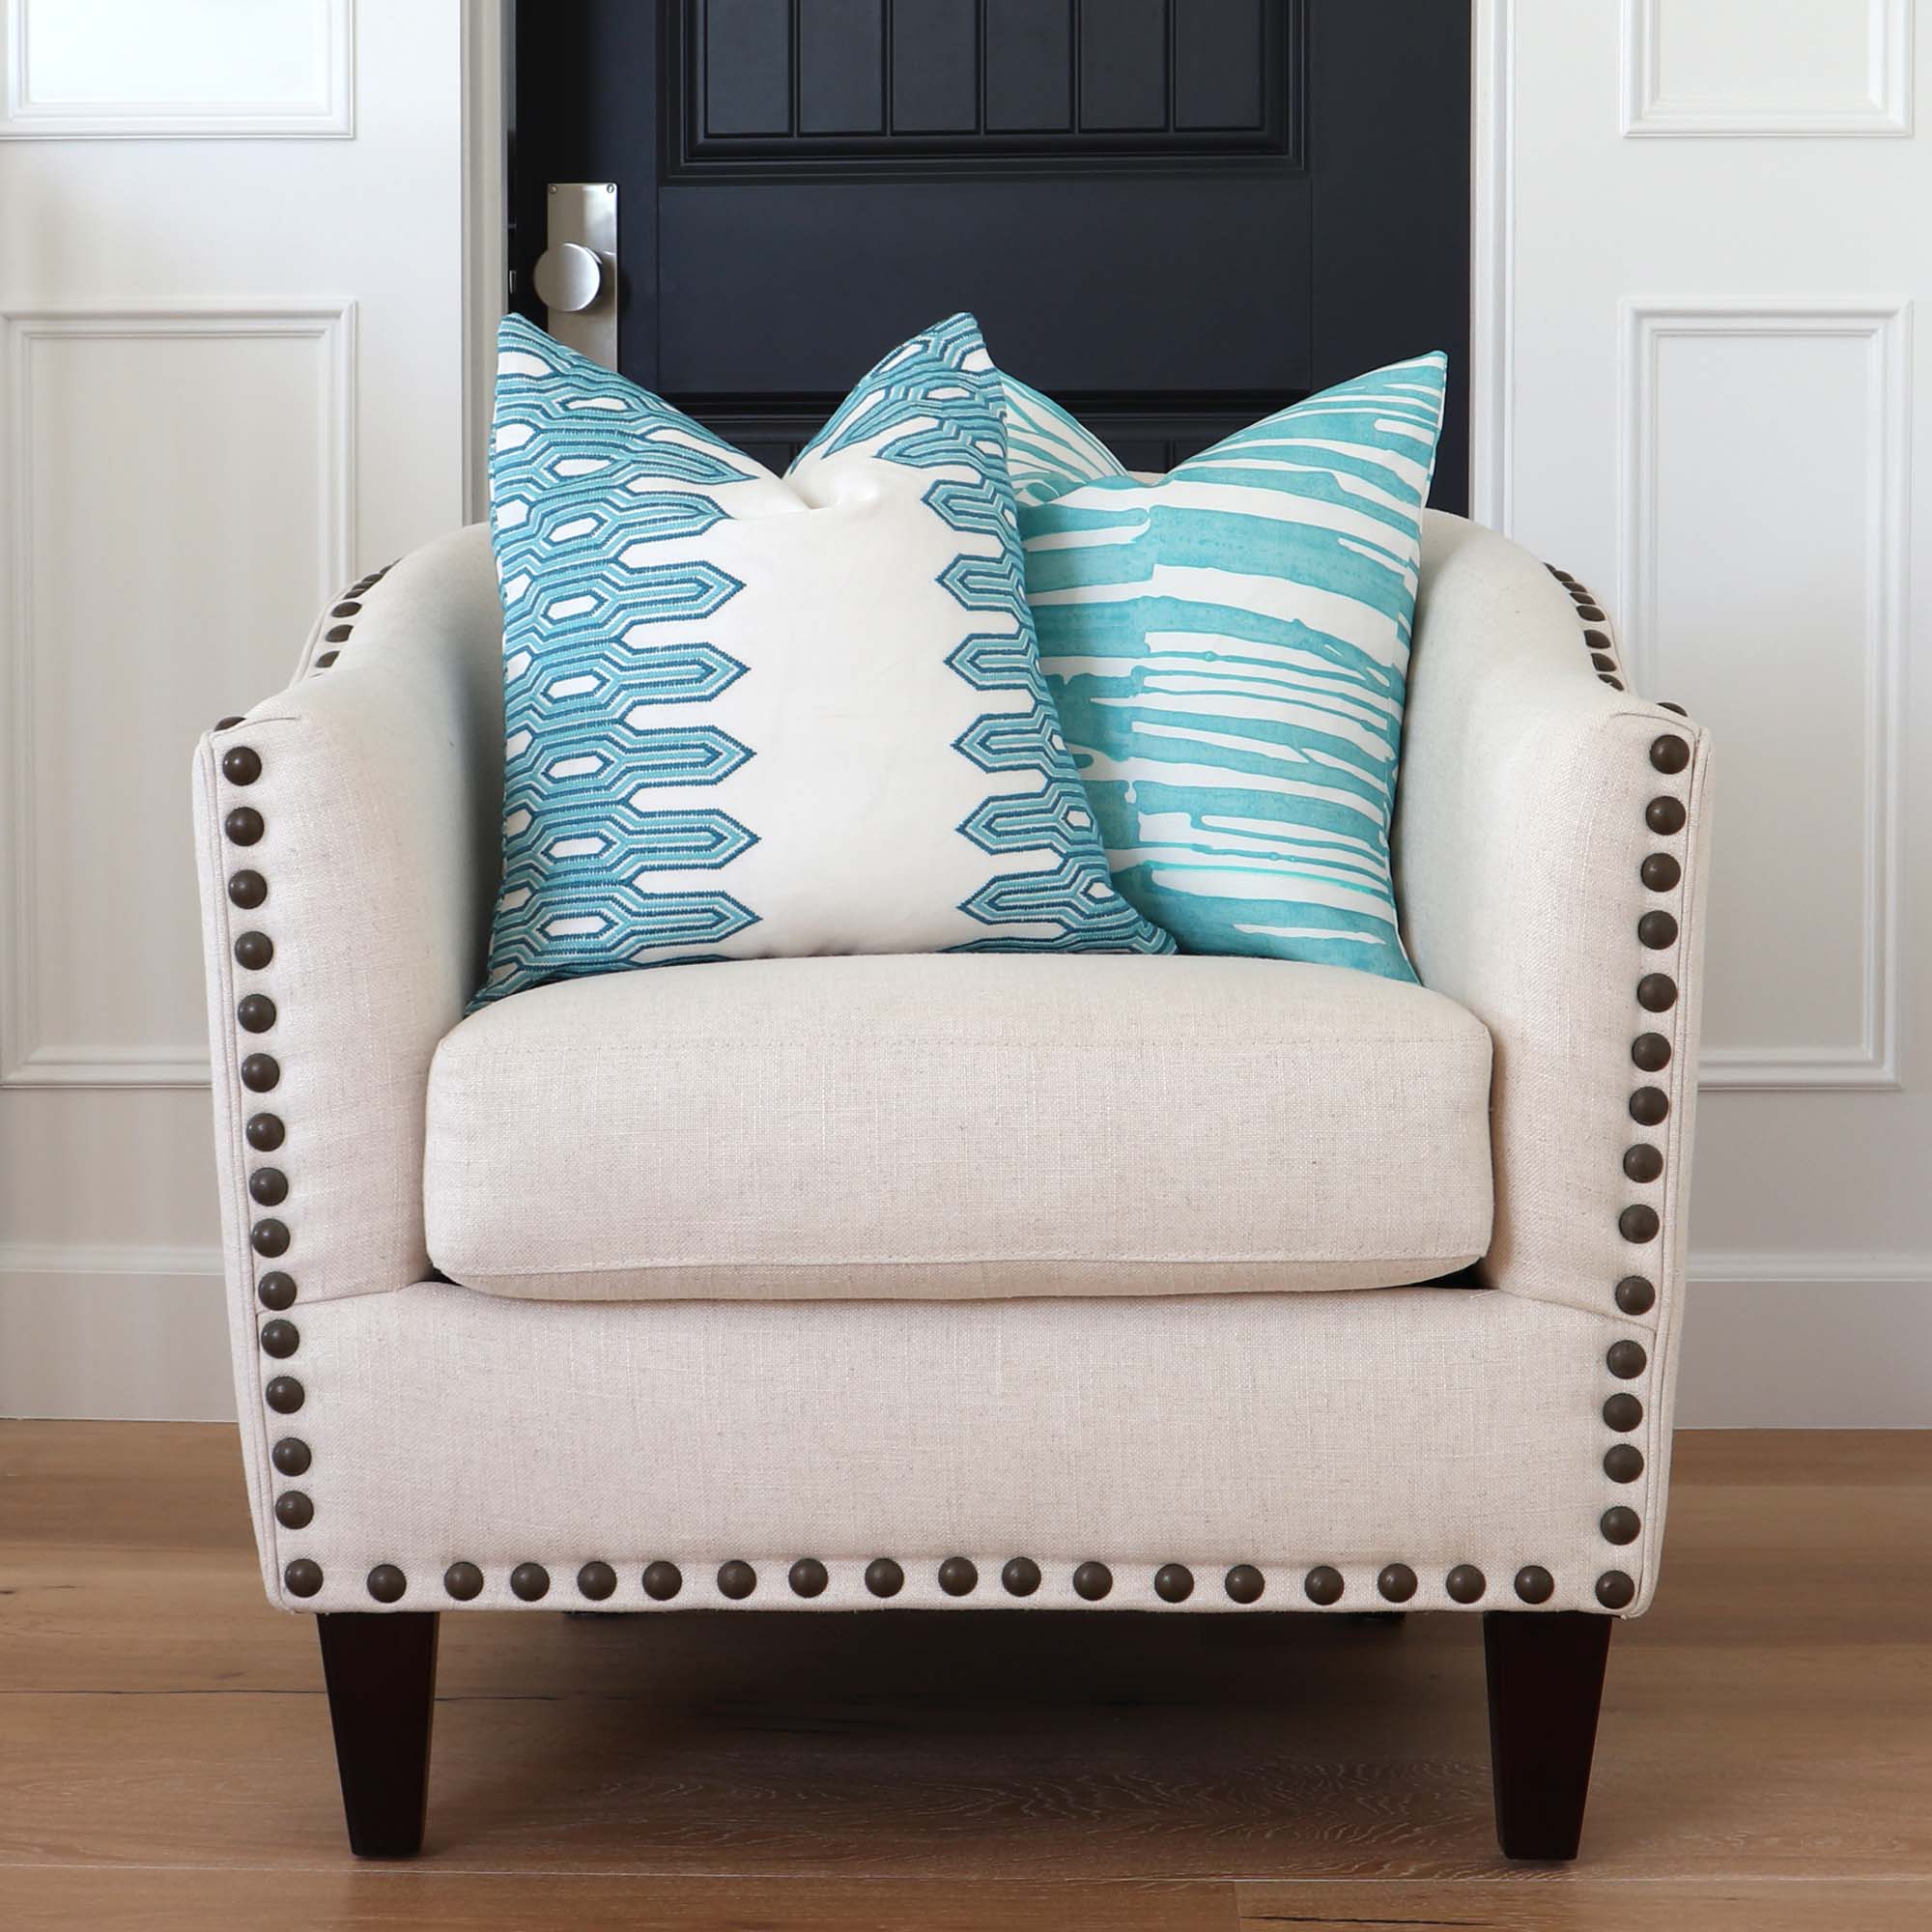 Thibaut Nola Stripe Aqua Embroidery Geometric Designer Decorative Throw Pillow Cover on Accent Chair in Home